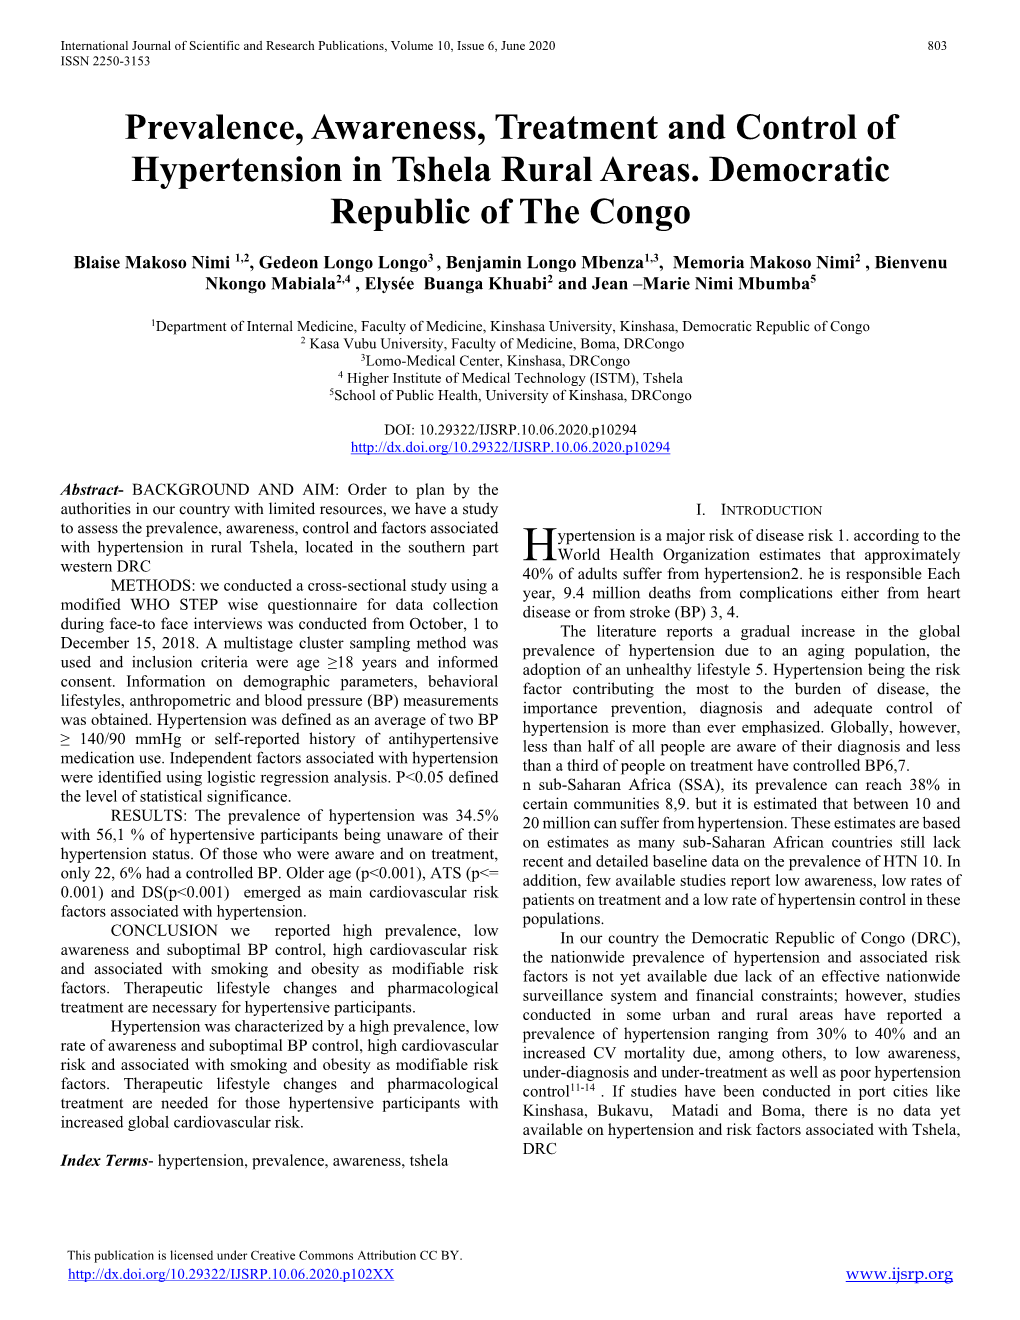 Prevalence, Awareness, Treatment and Control of Hypertension in Tshela Rural Areas. Democratic Republic of the Congo